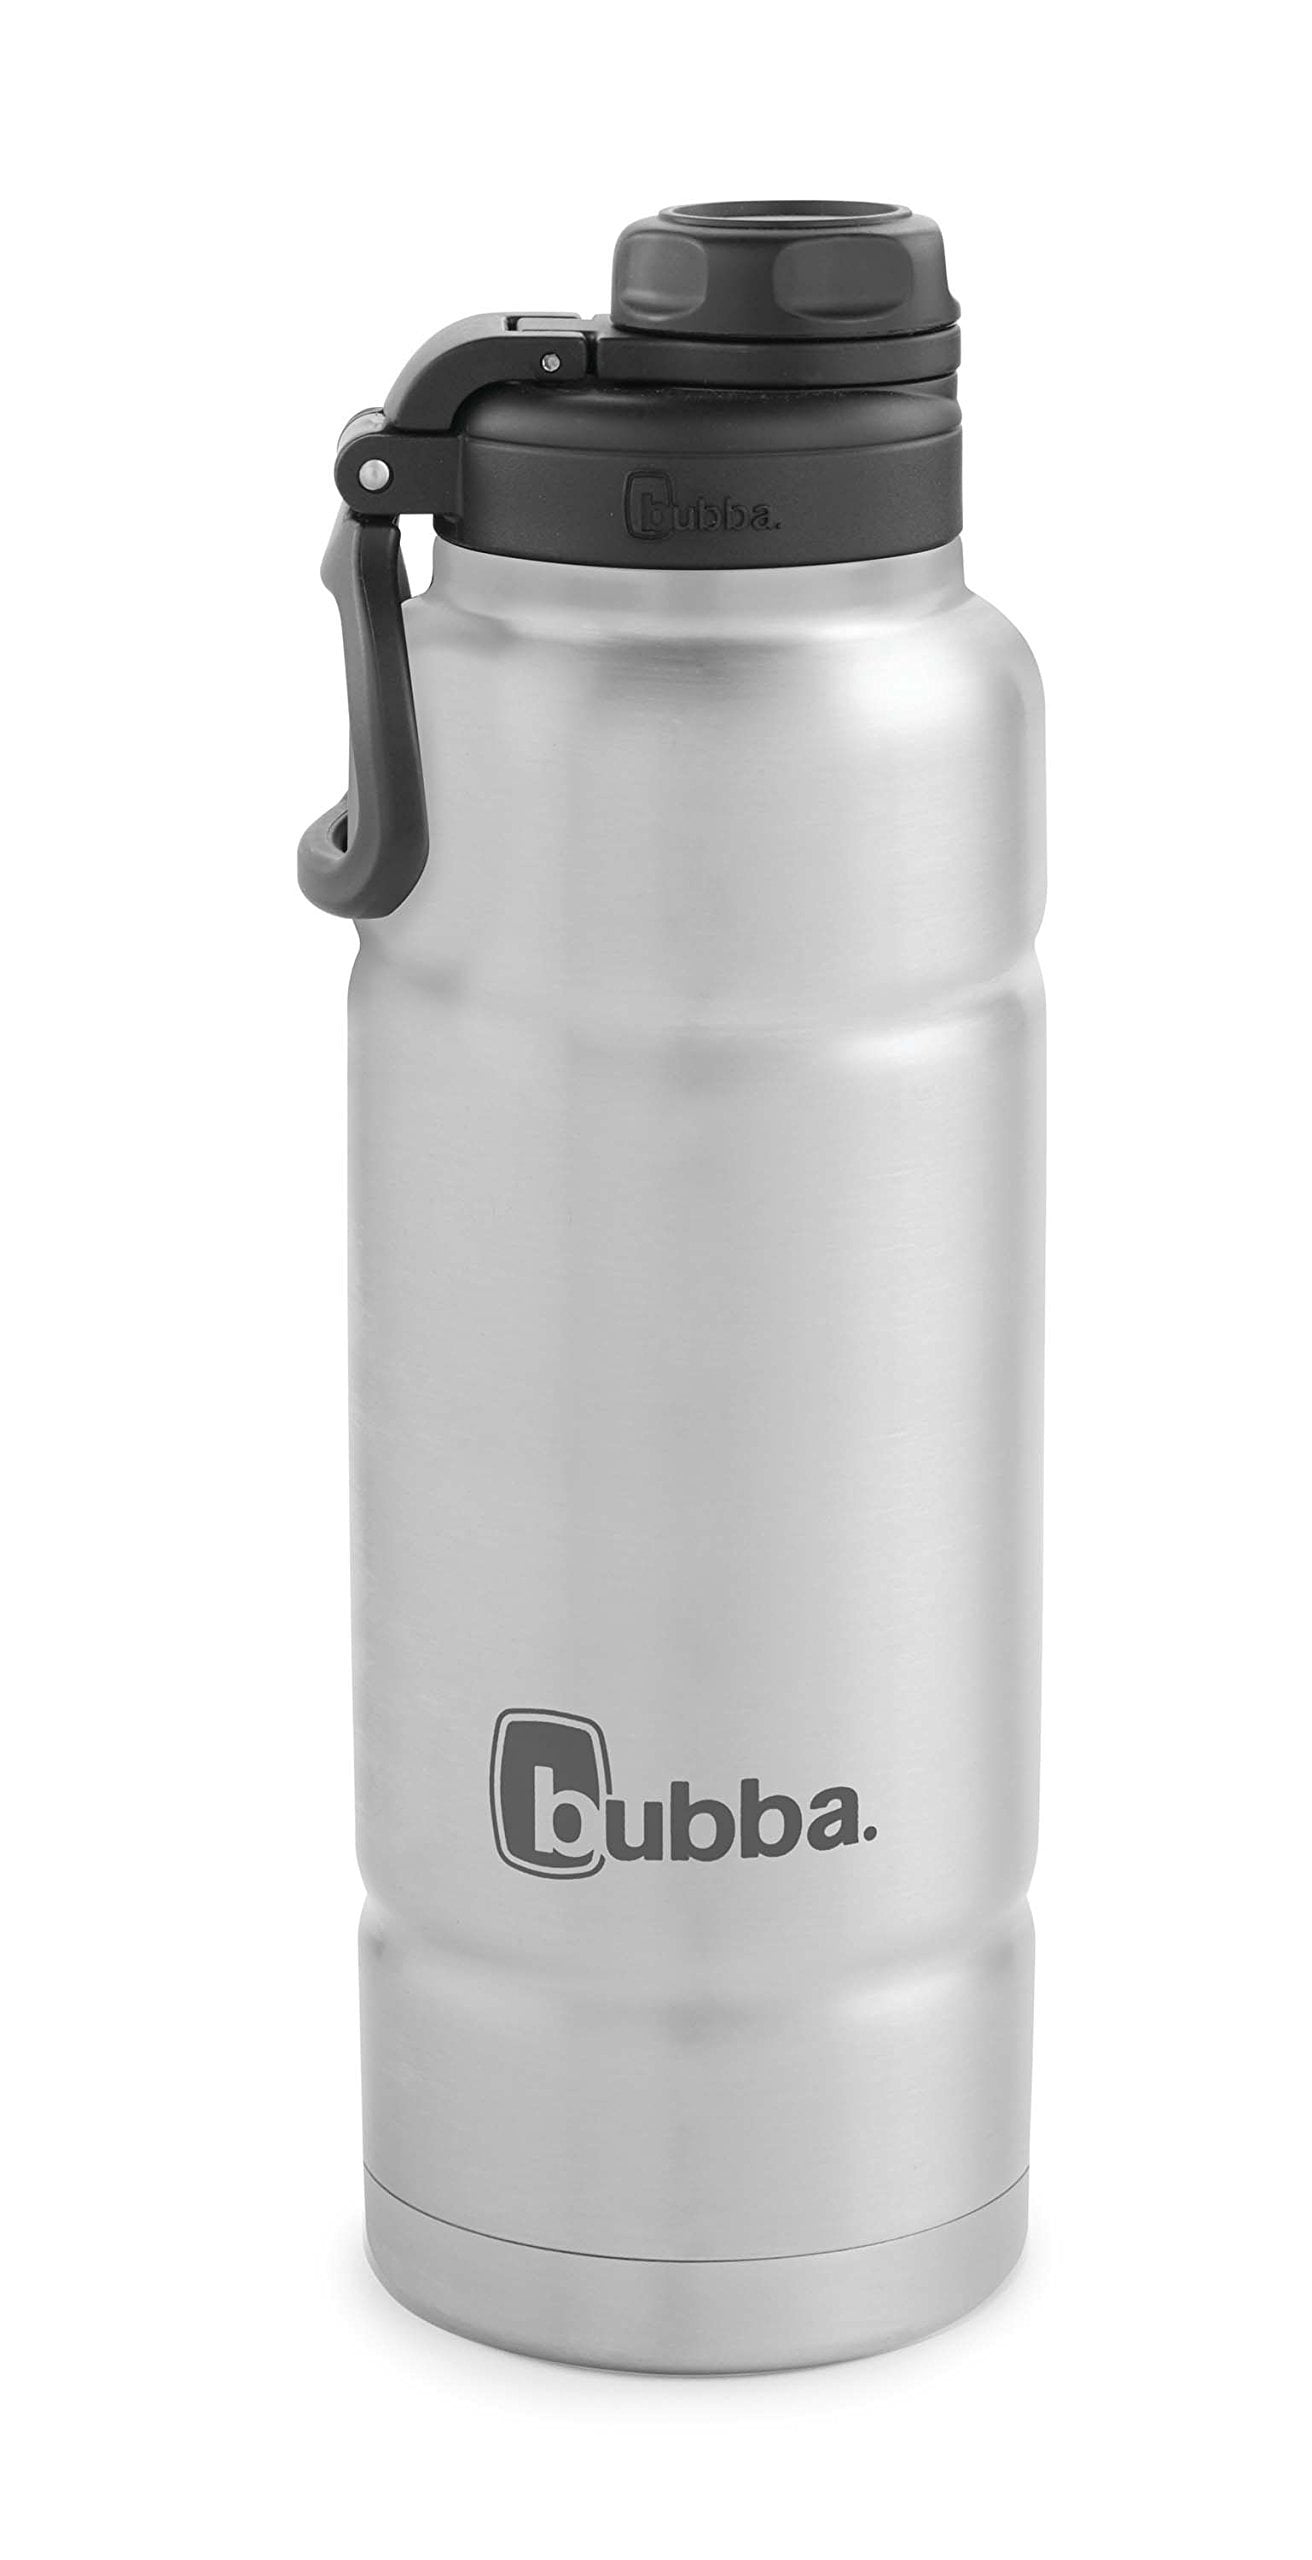 The Body Stainless Steel Water Bottle